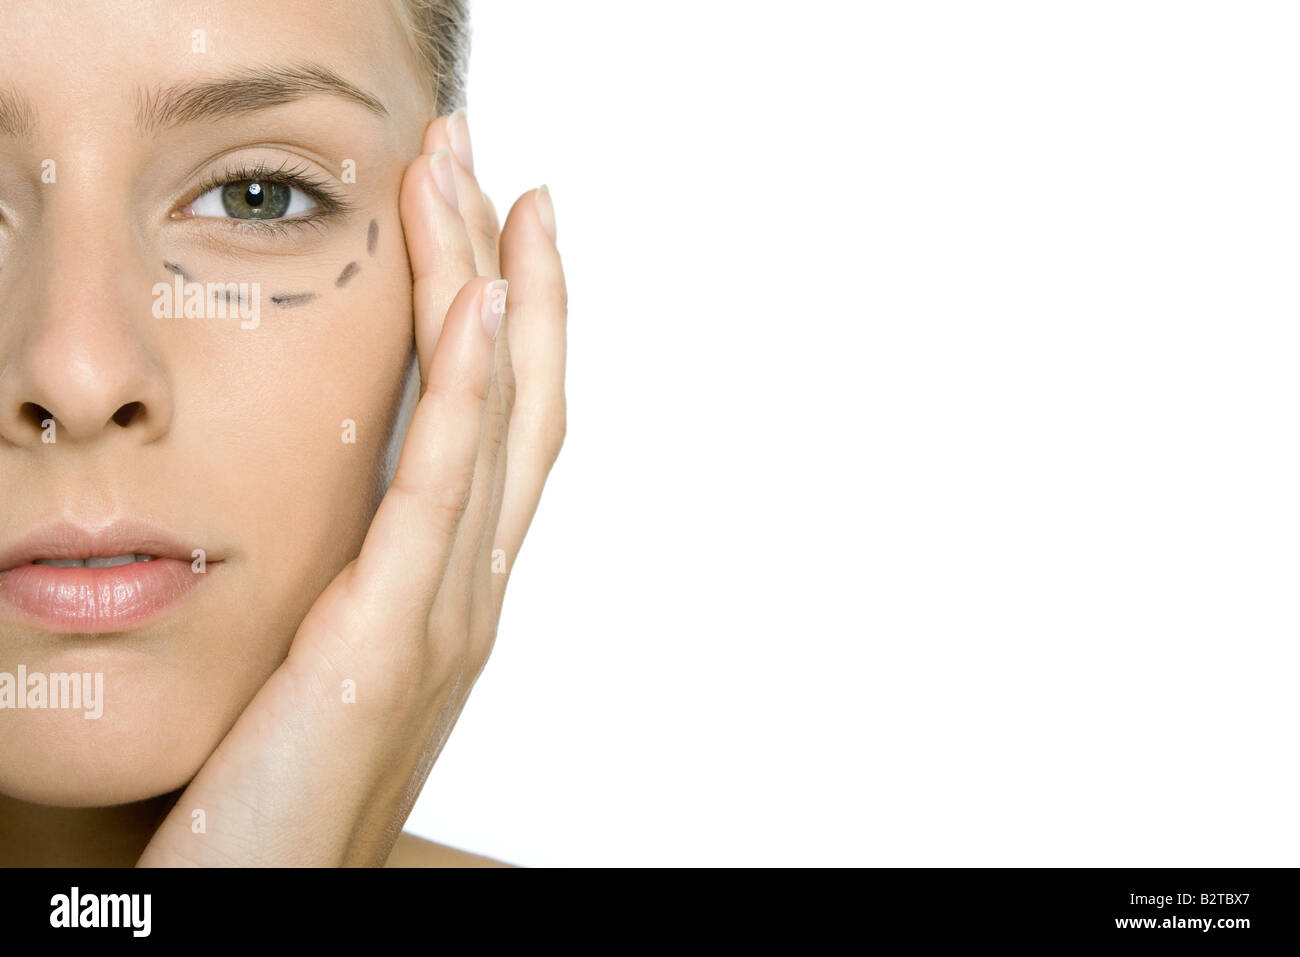 Woman with plastic surgery markings under her eye, close-up, cropped Stock Photo